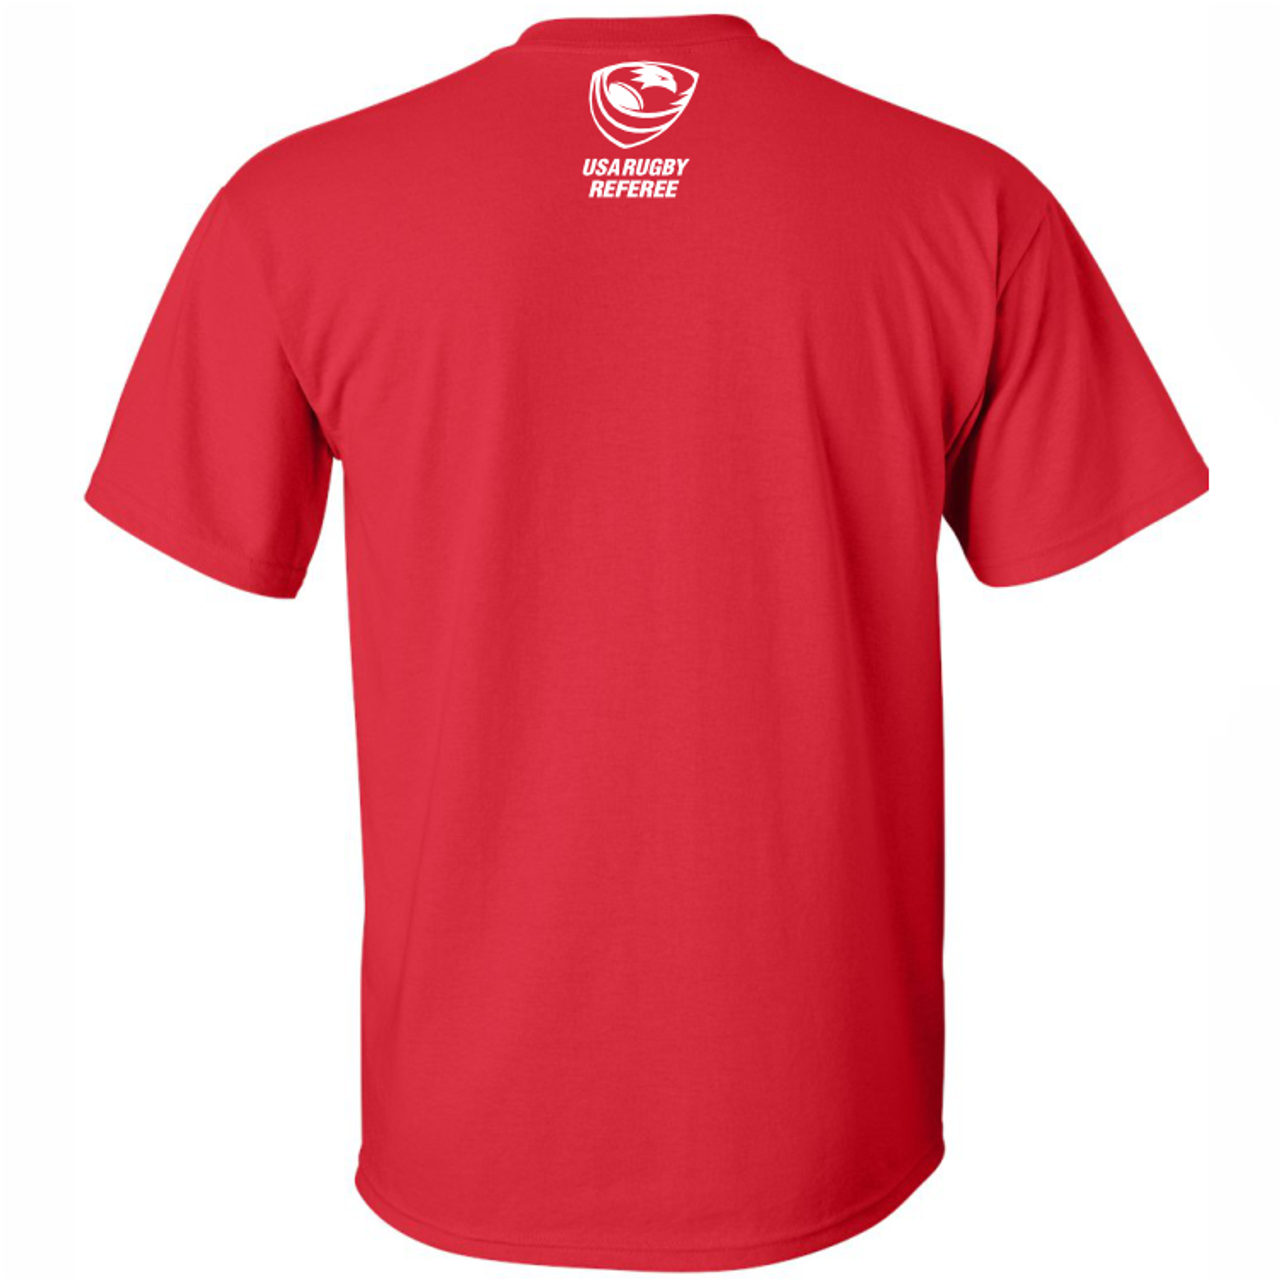 Ohio Rugby Referees T-Shirt, Red